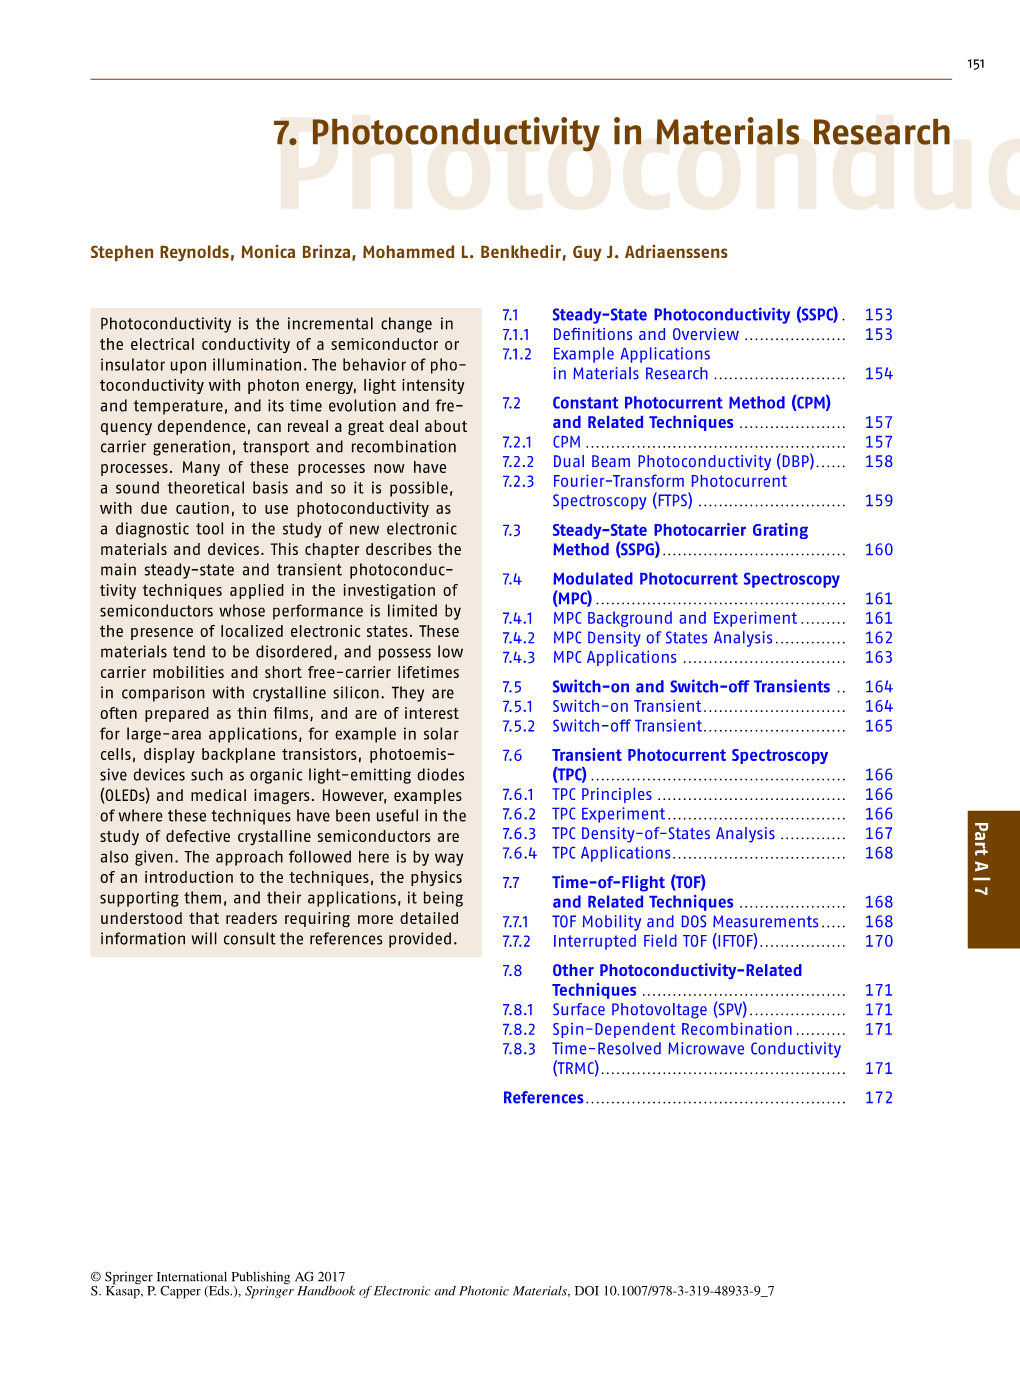 7. Photoconductivity in Materials Research C Stephen Reynolds, Monica Brinza, Mohammed L